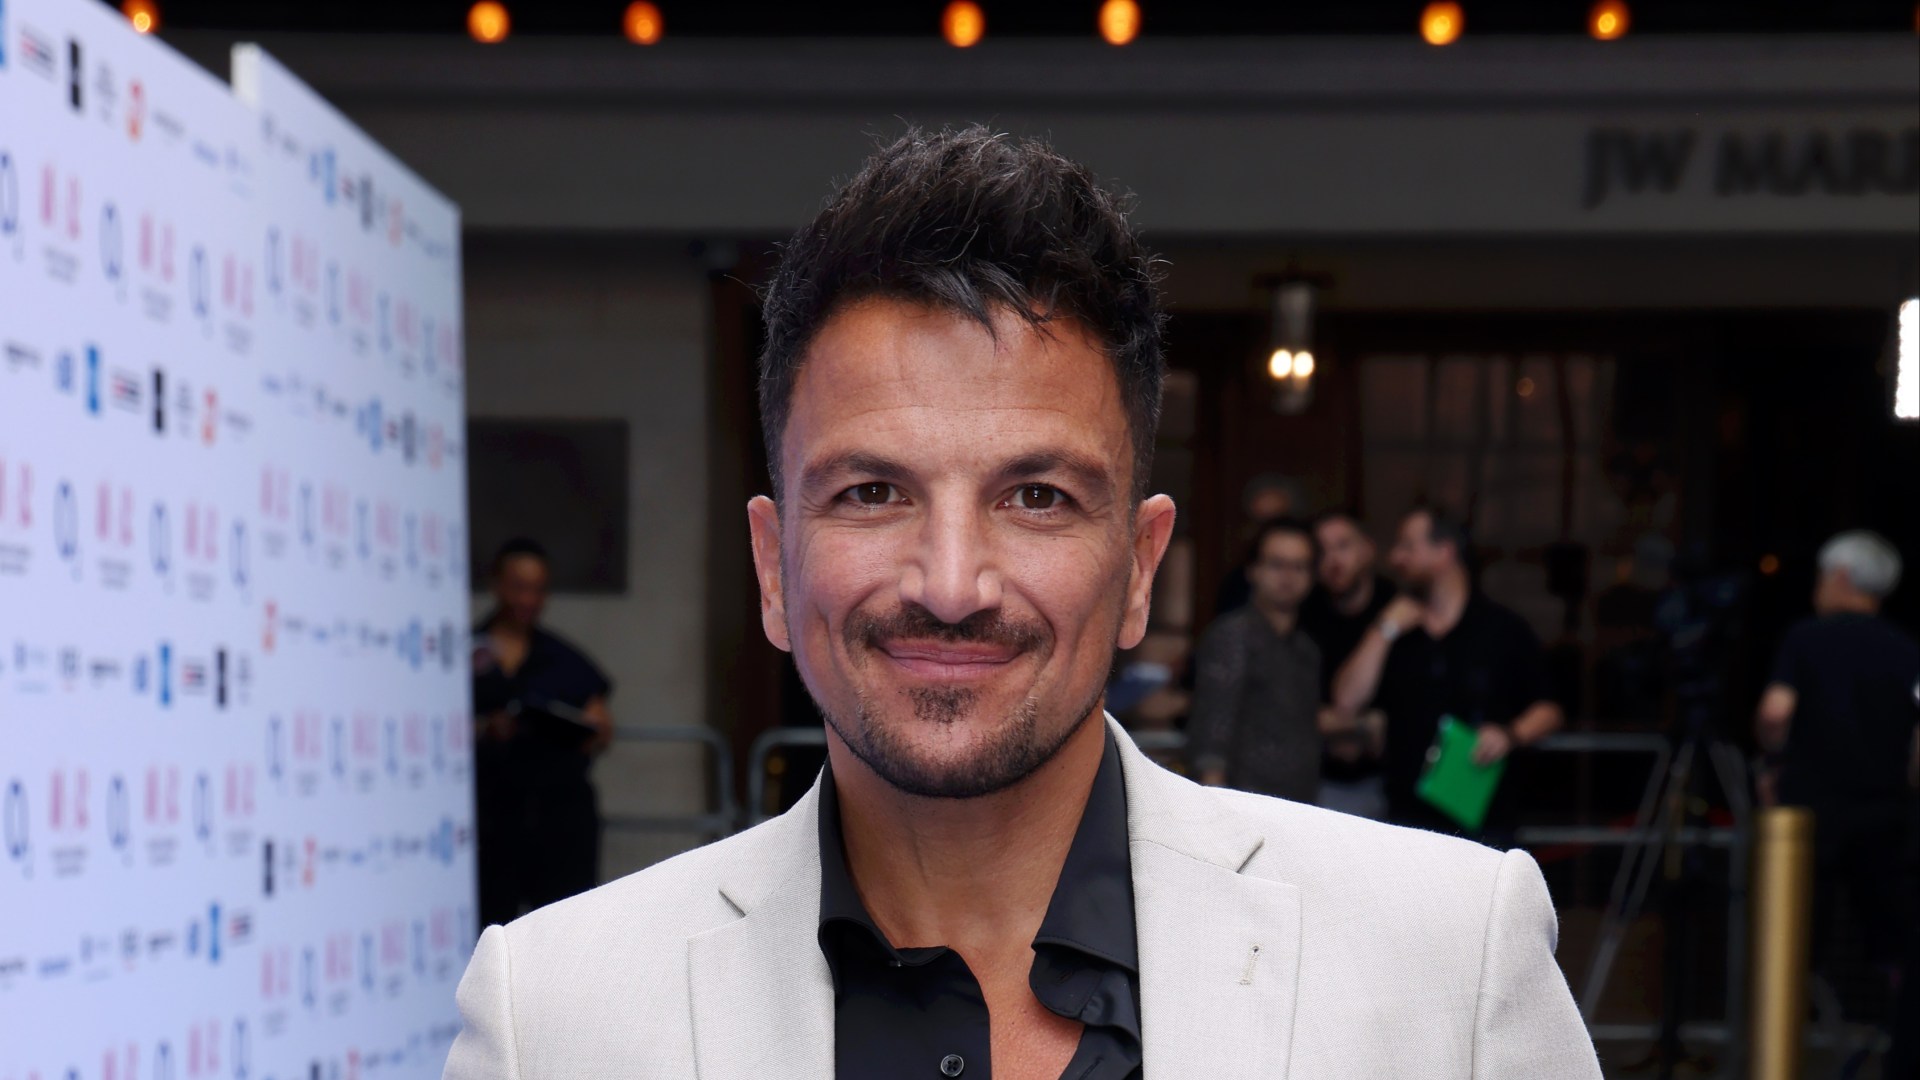 Peter Andre ditches ‘dad look’ as he turns into a hardman thug and throws a punch in new film trailer [Video]